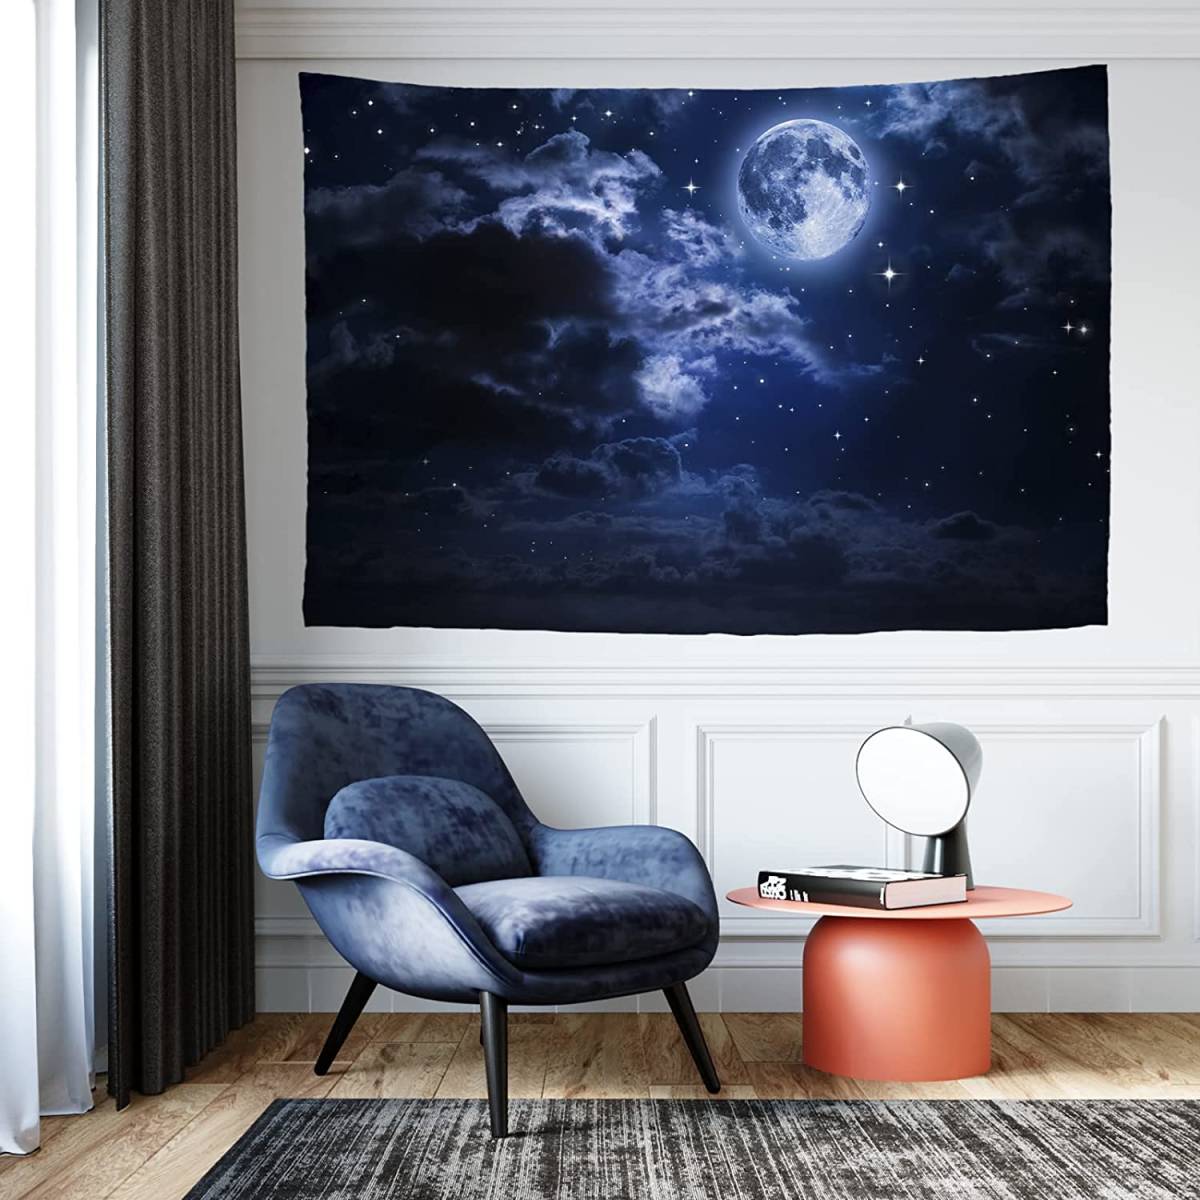  illusion ... tapestry night empty star empty high quality interior ornament part shop decoration nature full month .. effect relax decoration attaching pattern change 